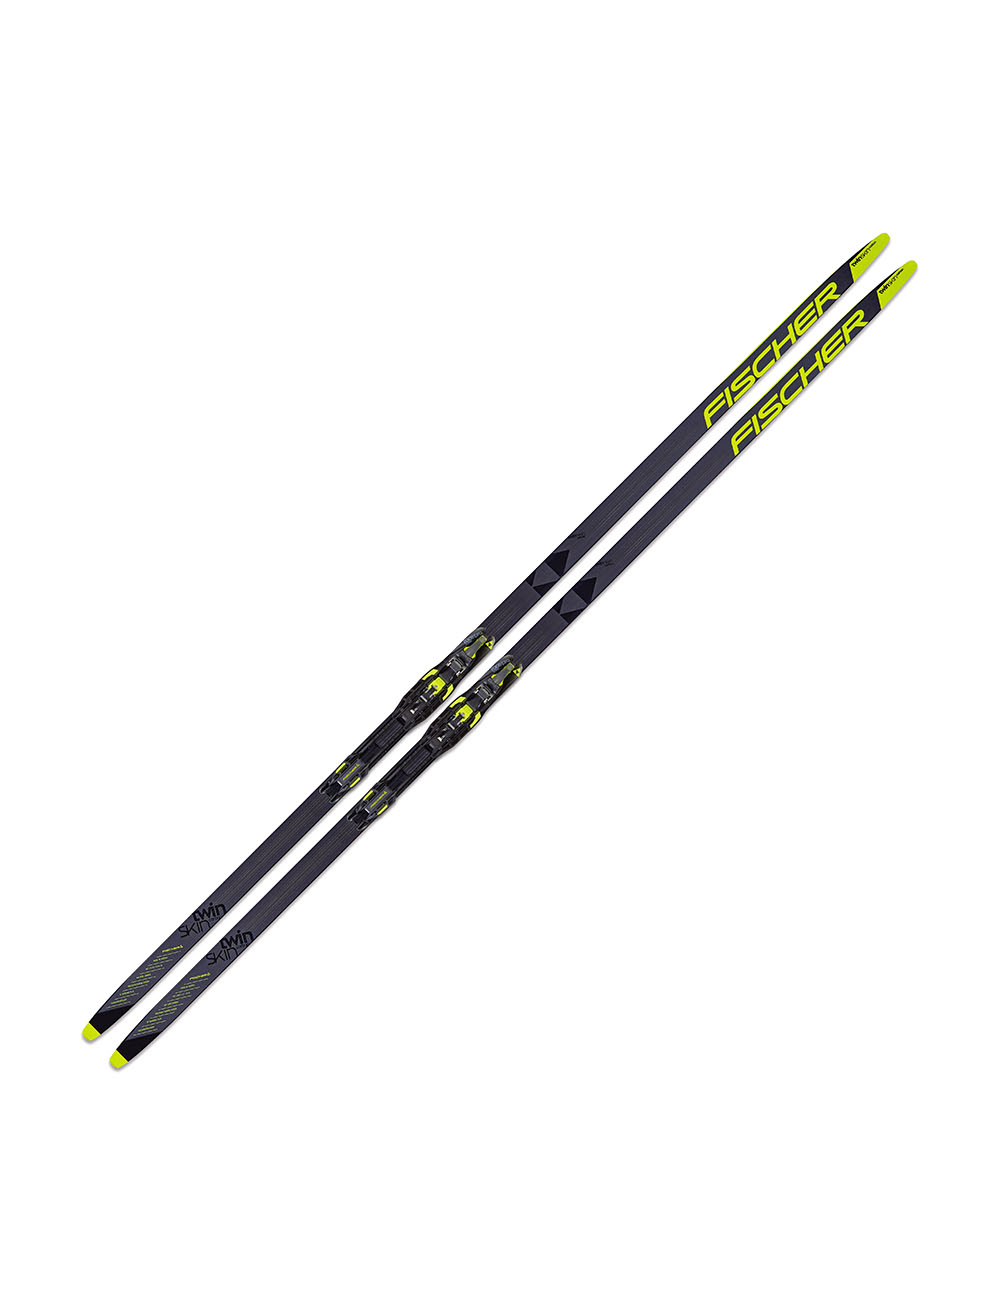 FISCHER Лыжи TWIN SKIN CARBON MED IFP Артикул: N13519